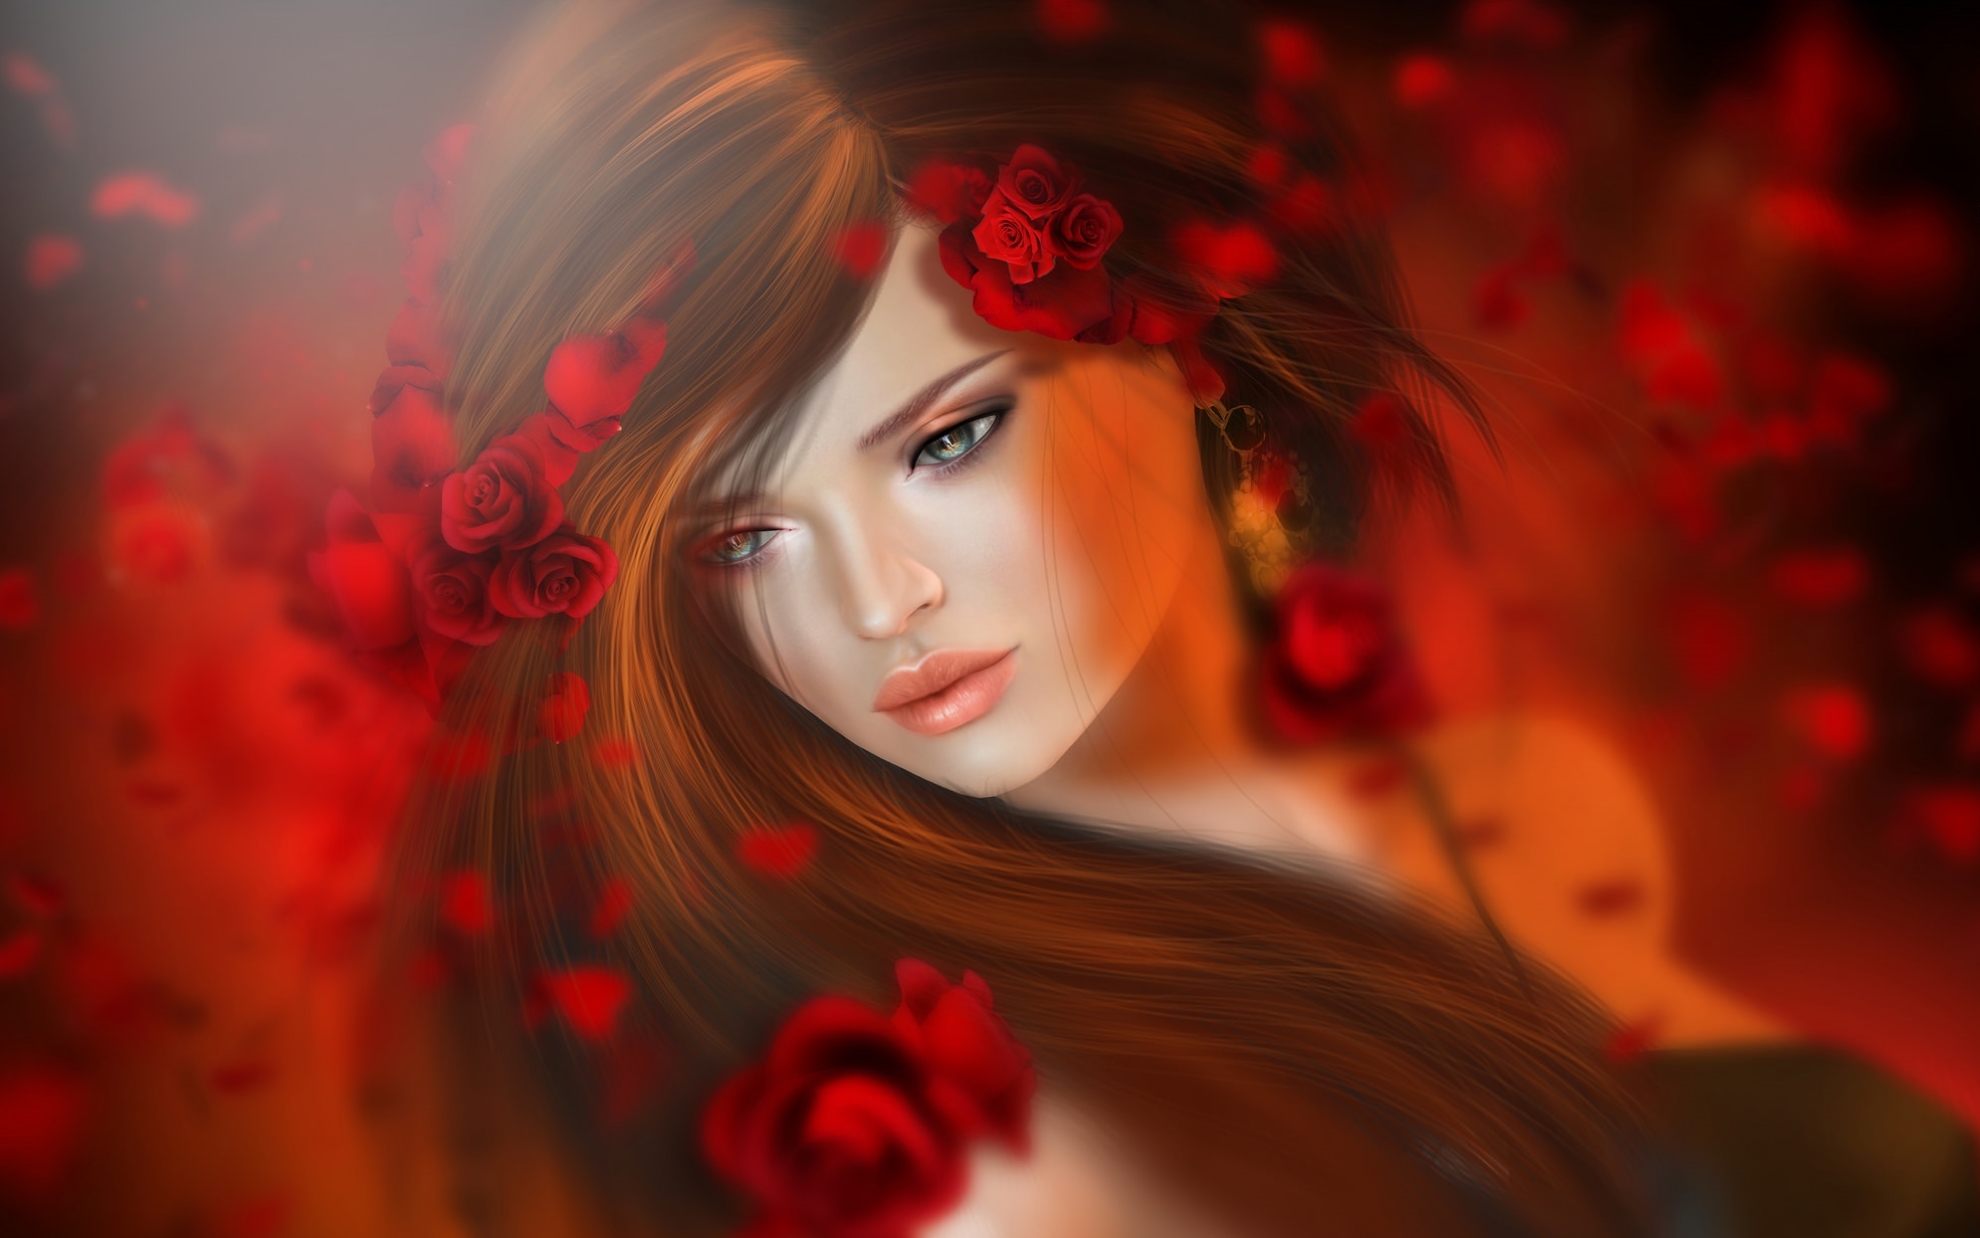 Fantasy Girl with Roses in her Hair HD Wallpaper 